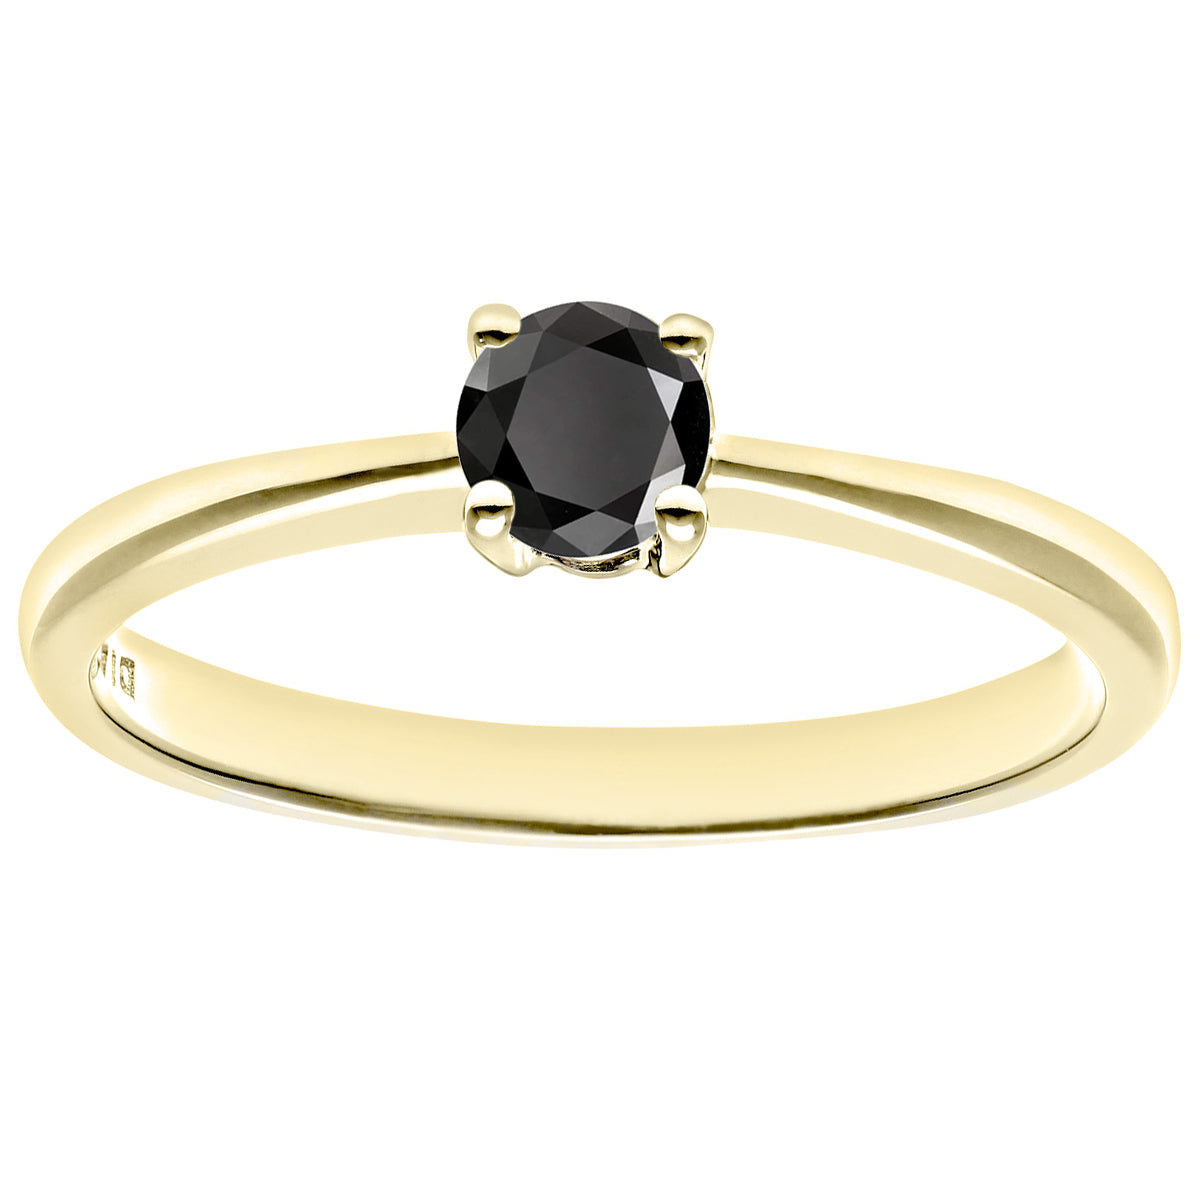 18ct Gold  Round 1/4ct Diamond 4 Claw Solitaire Engagement Ring - PR0AXL4305Y18BLK